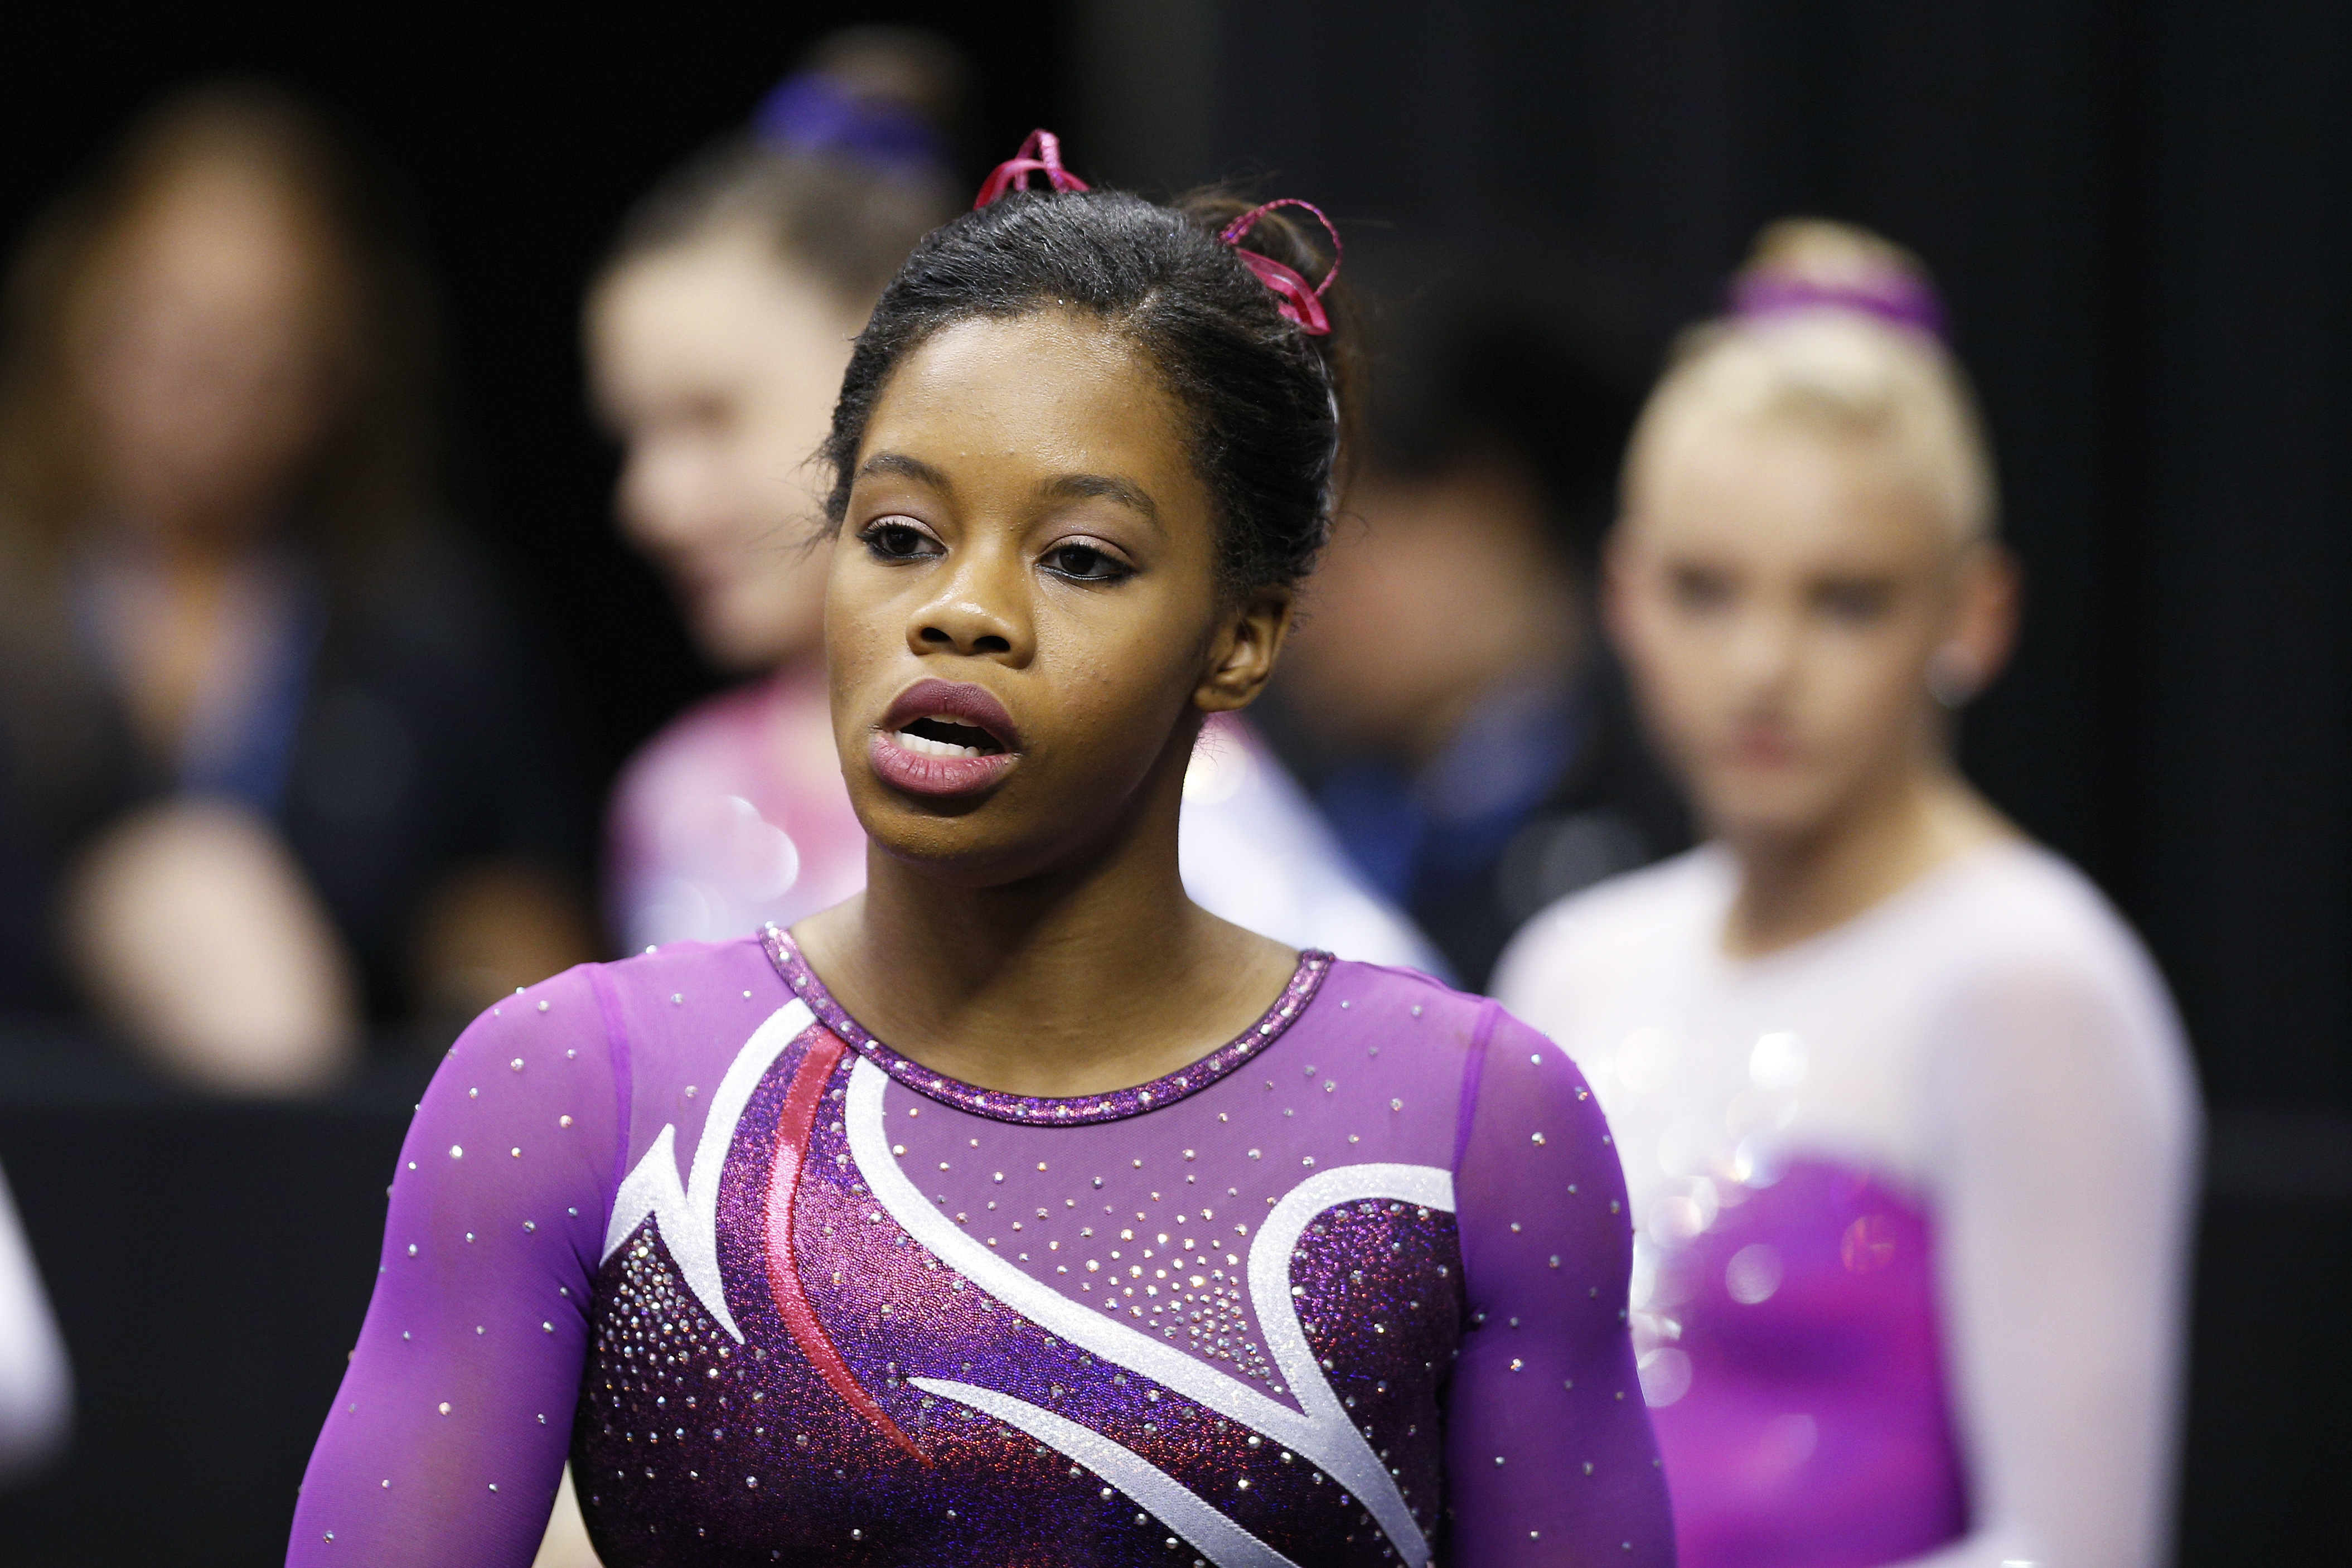 Gabrielle Douglas competes in the women's finals of the 2015 P&G Gymnastics Championships at Bankers Life Fieldhouse on August 15, 2015 in Indianapolis, Indiana. | Source: Getty Images